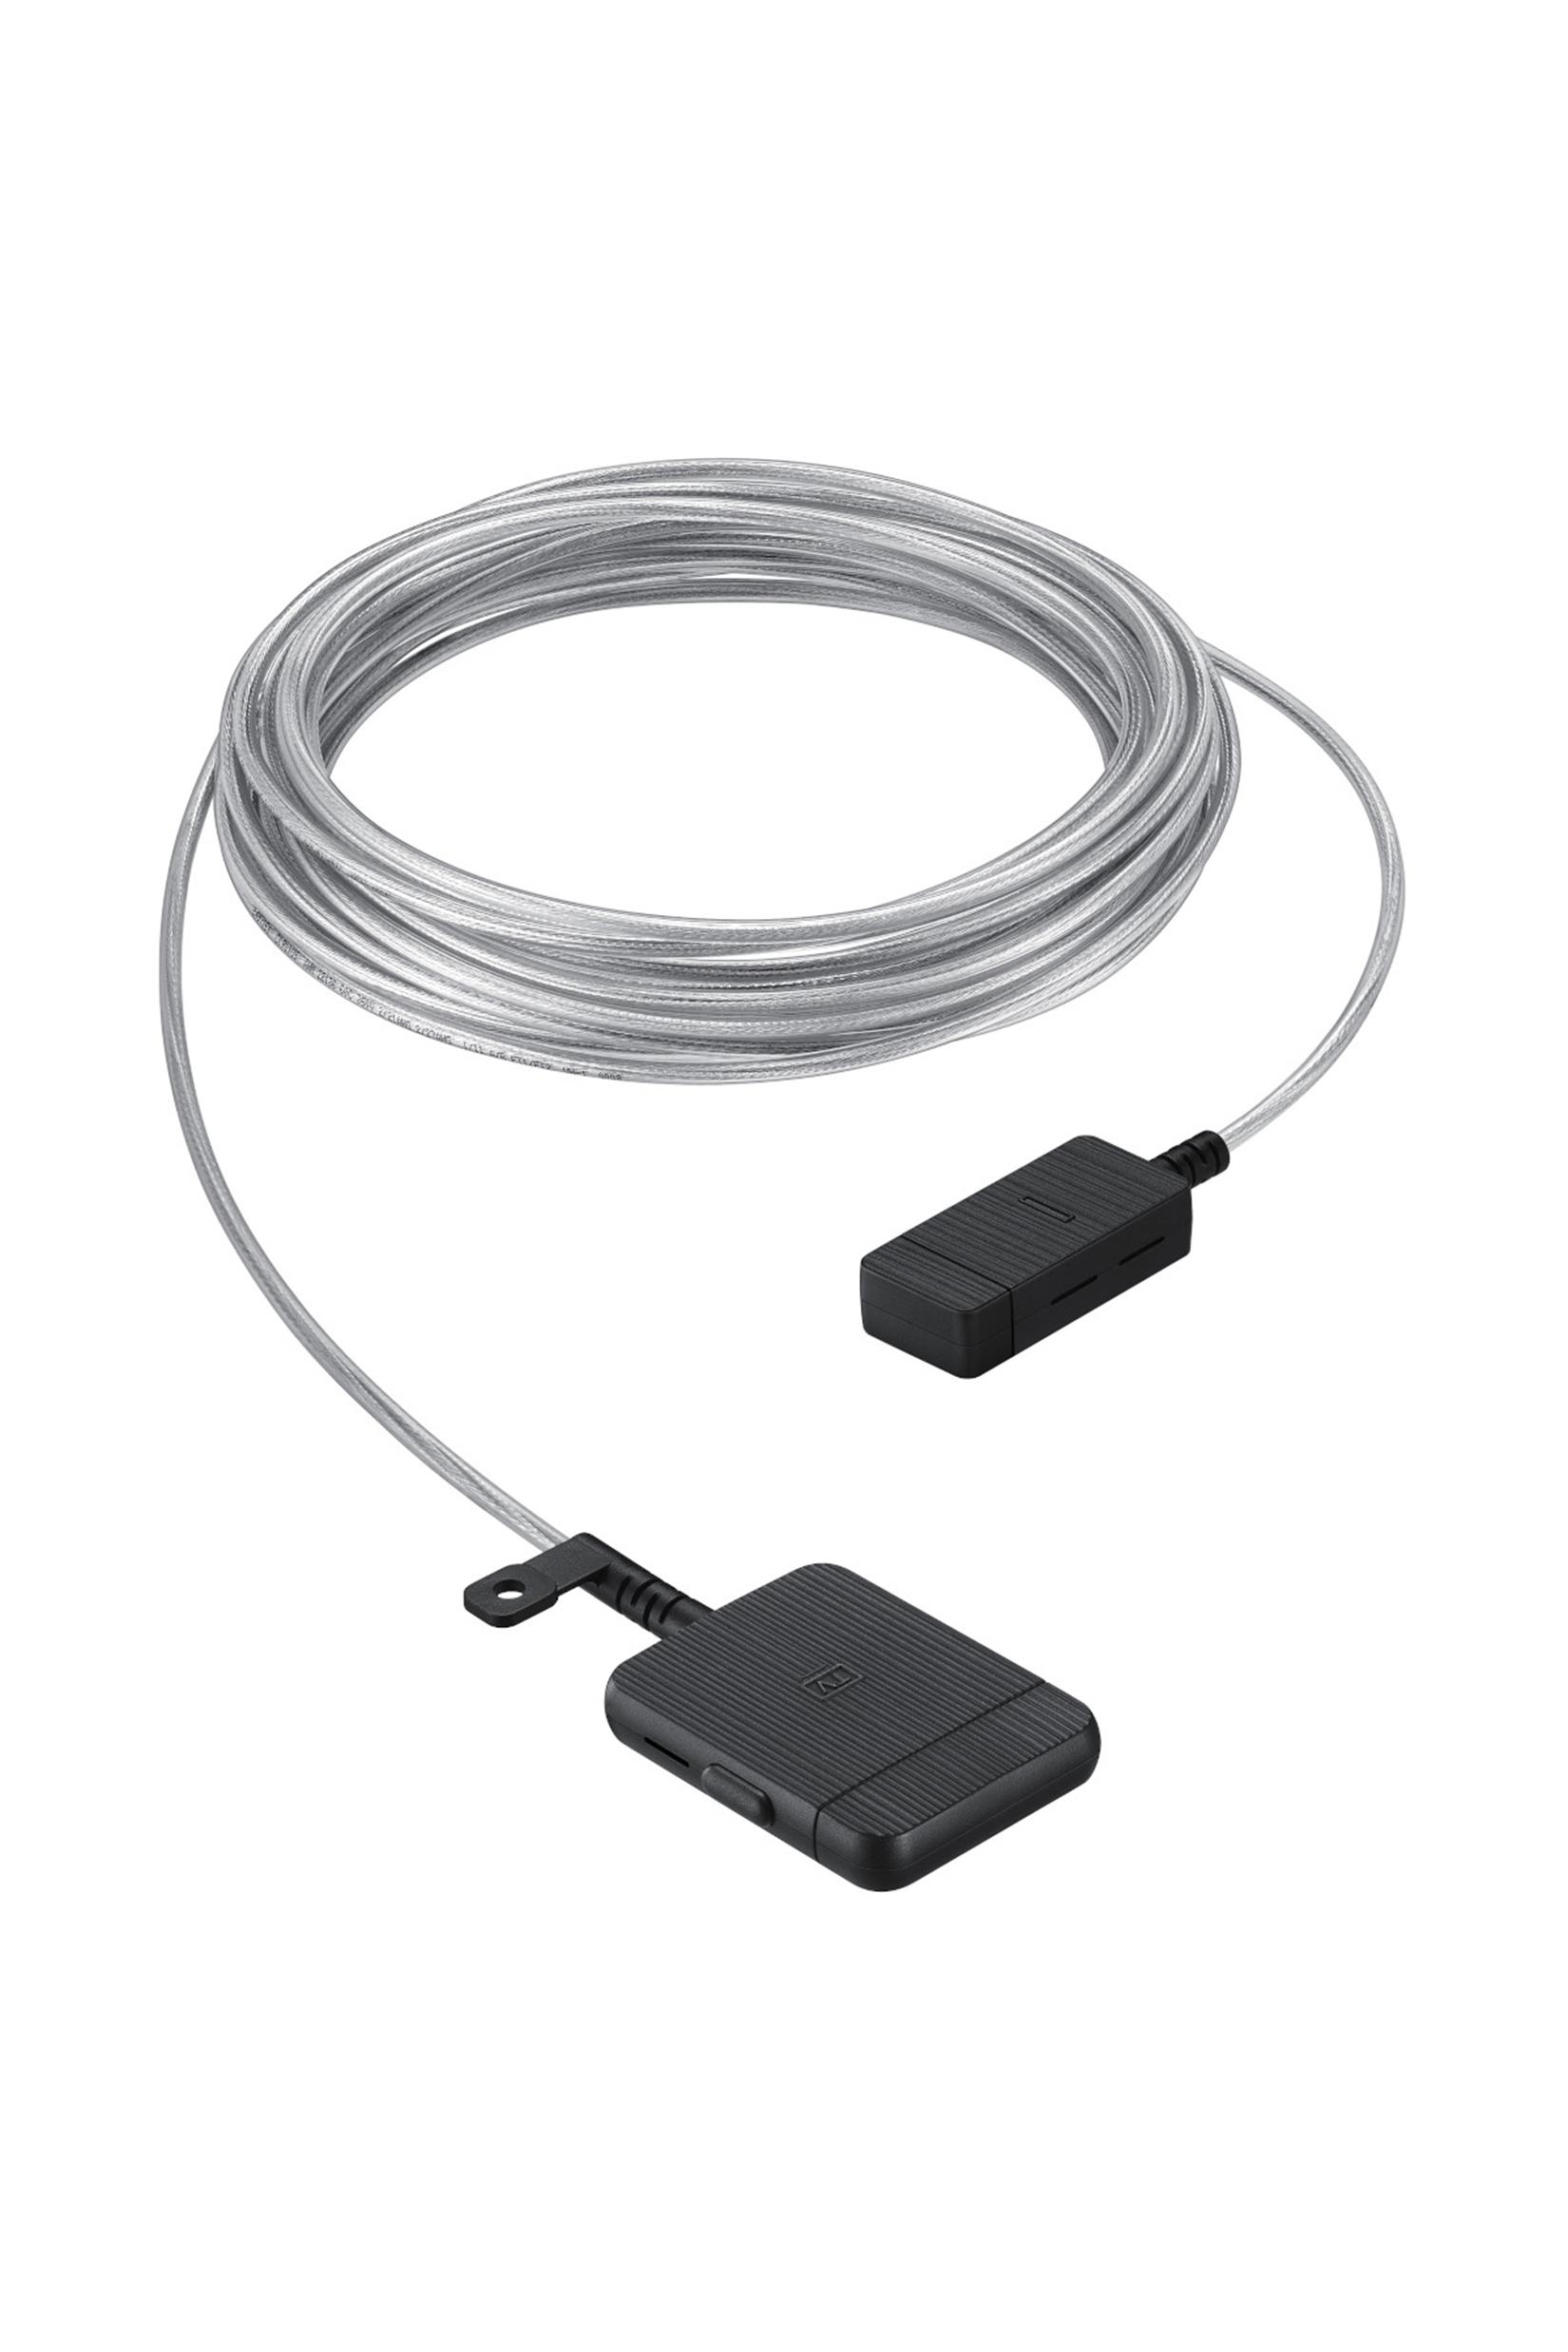 Samsung VG-SOCR15/ZA 15m One Invisible Connection Cable - image 2 of 4